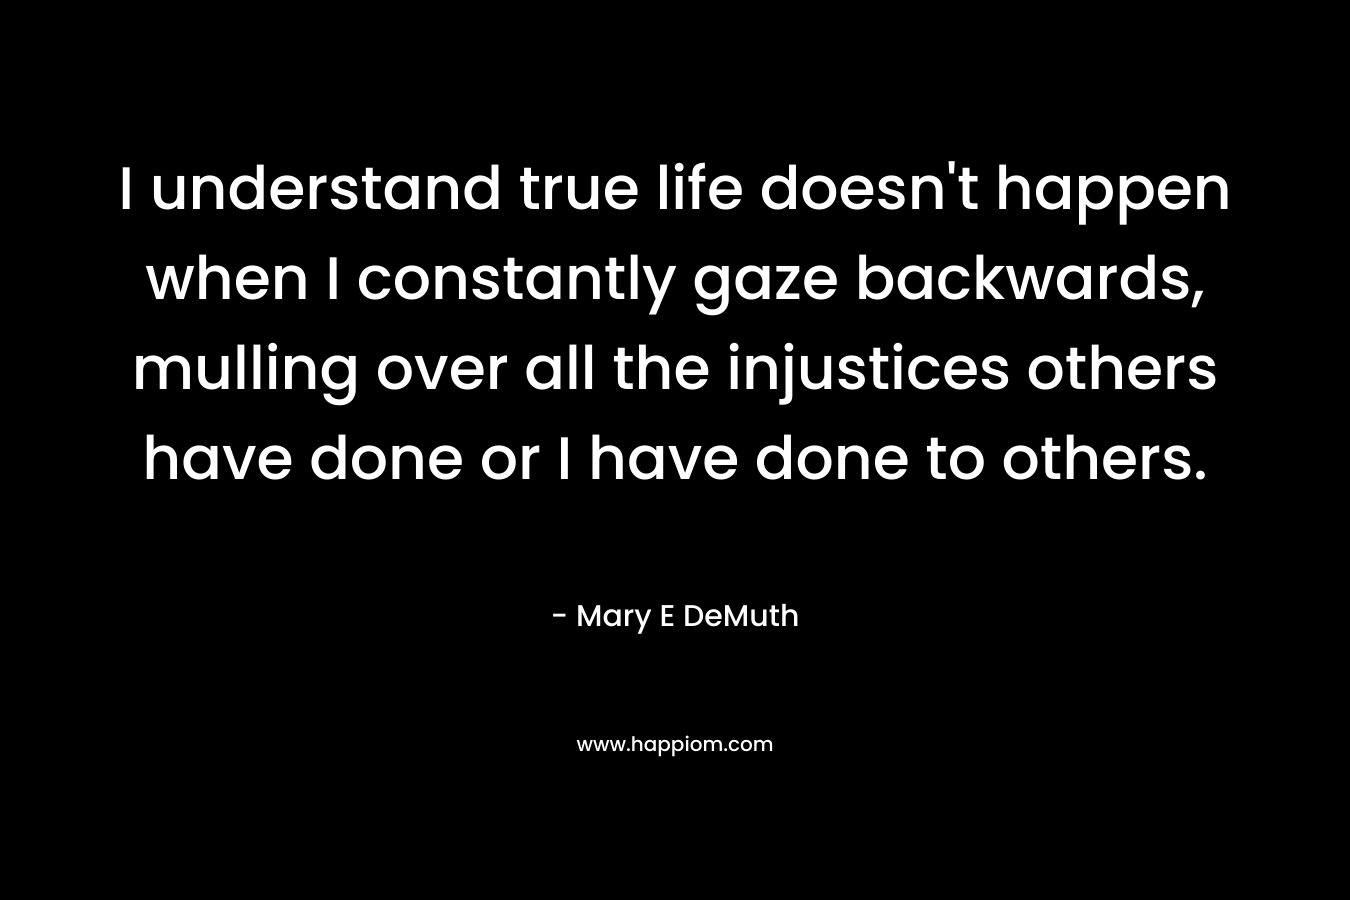 I understand true life doesn’t happen when I constantly gaze backwards, mulling over all the injustices others have done or I have done to others. – Mary E DeMuth